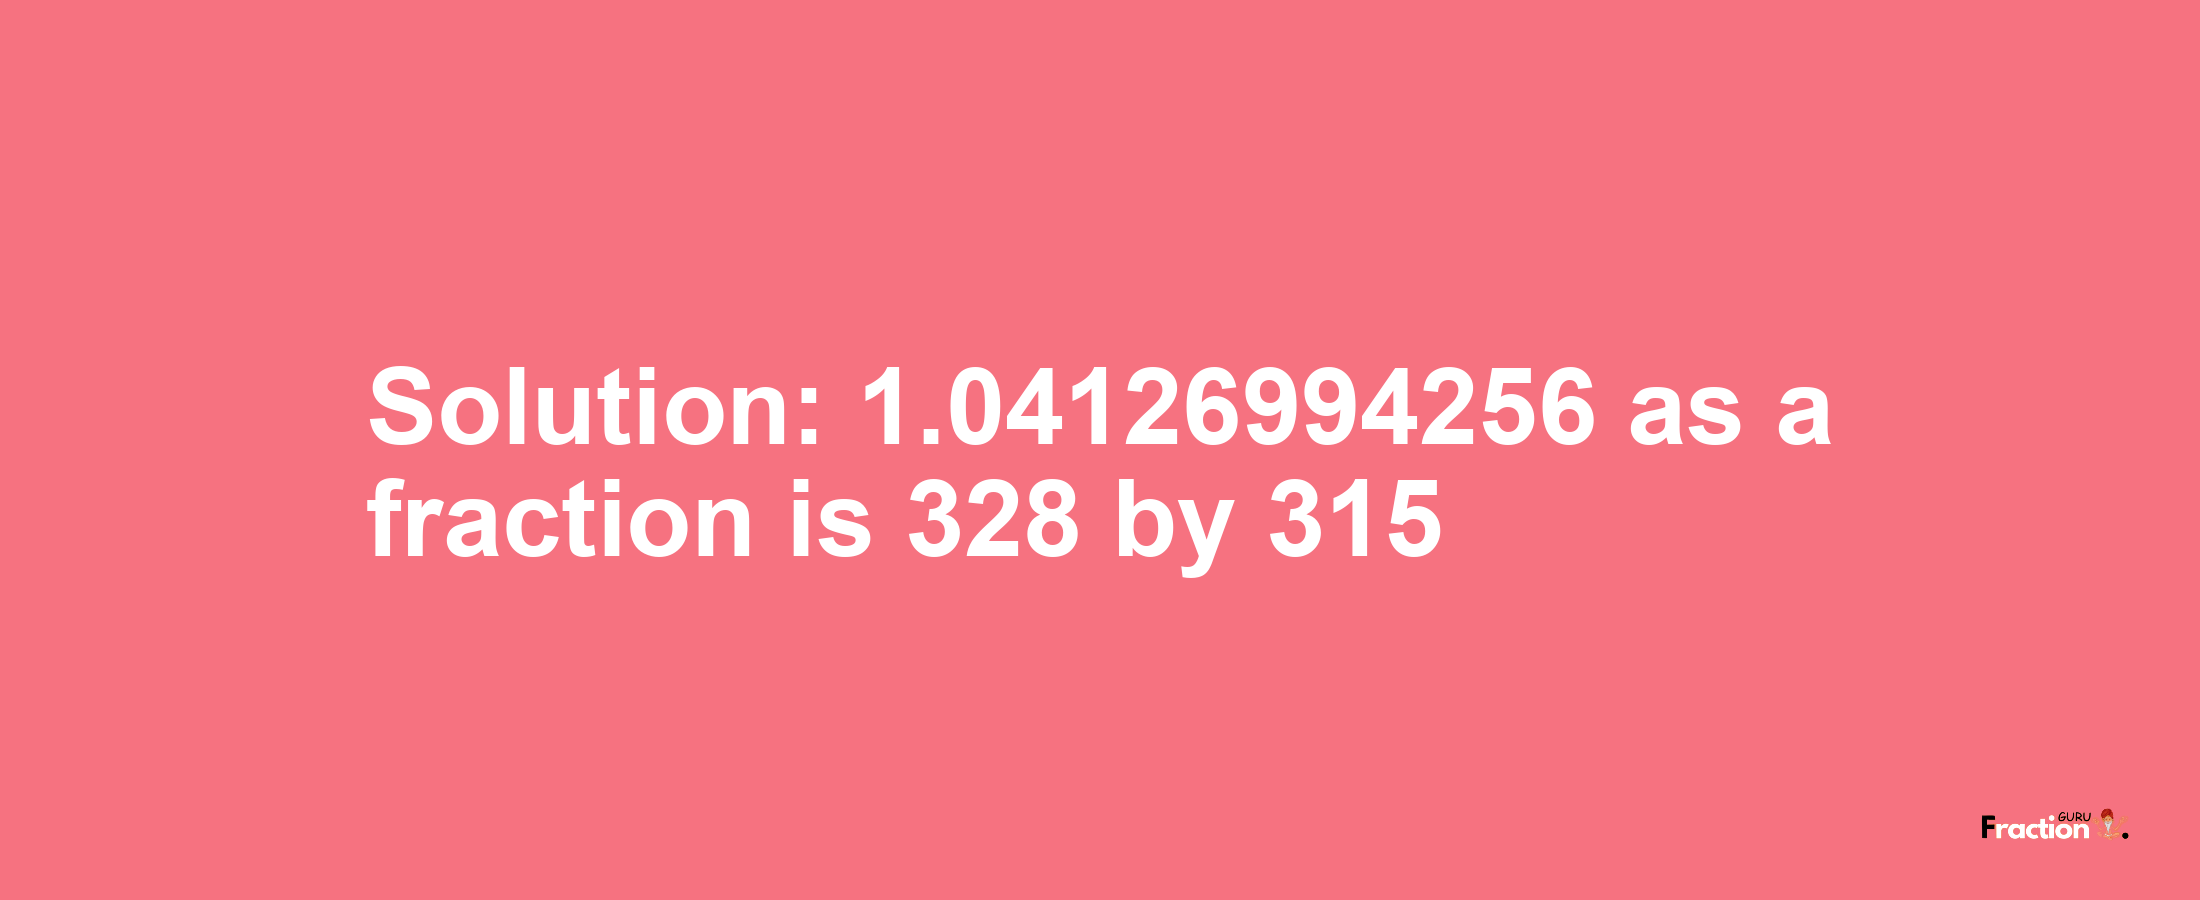 Solution:1.04126994256 as a fraction is 328/315